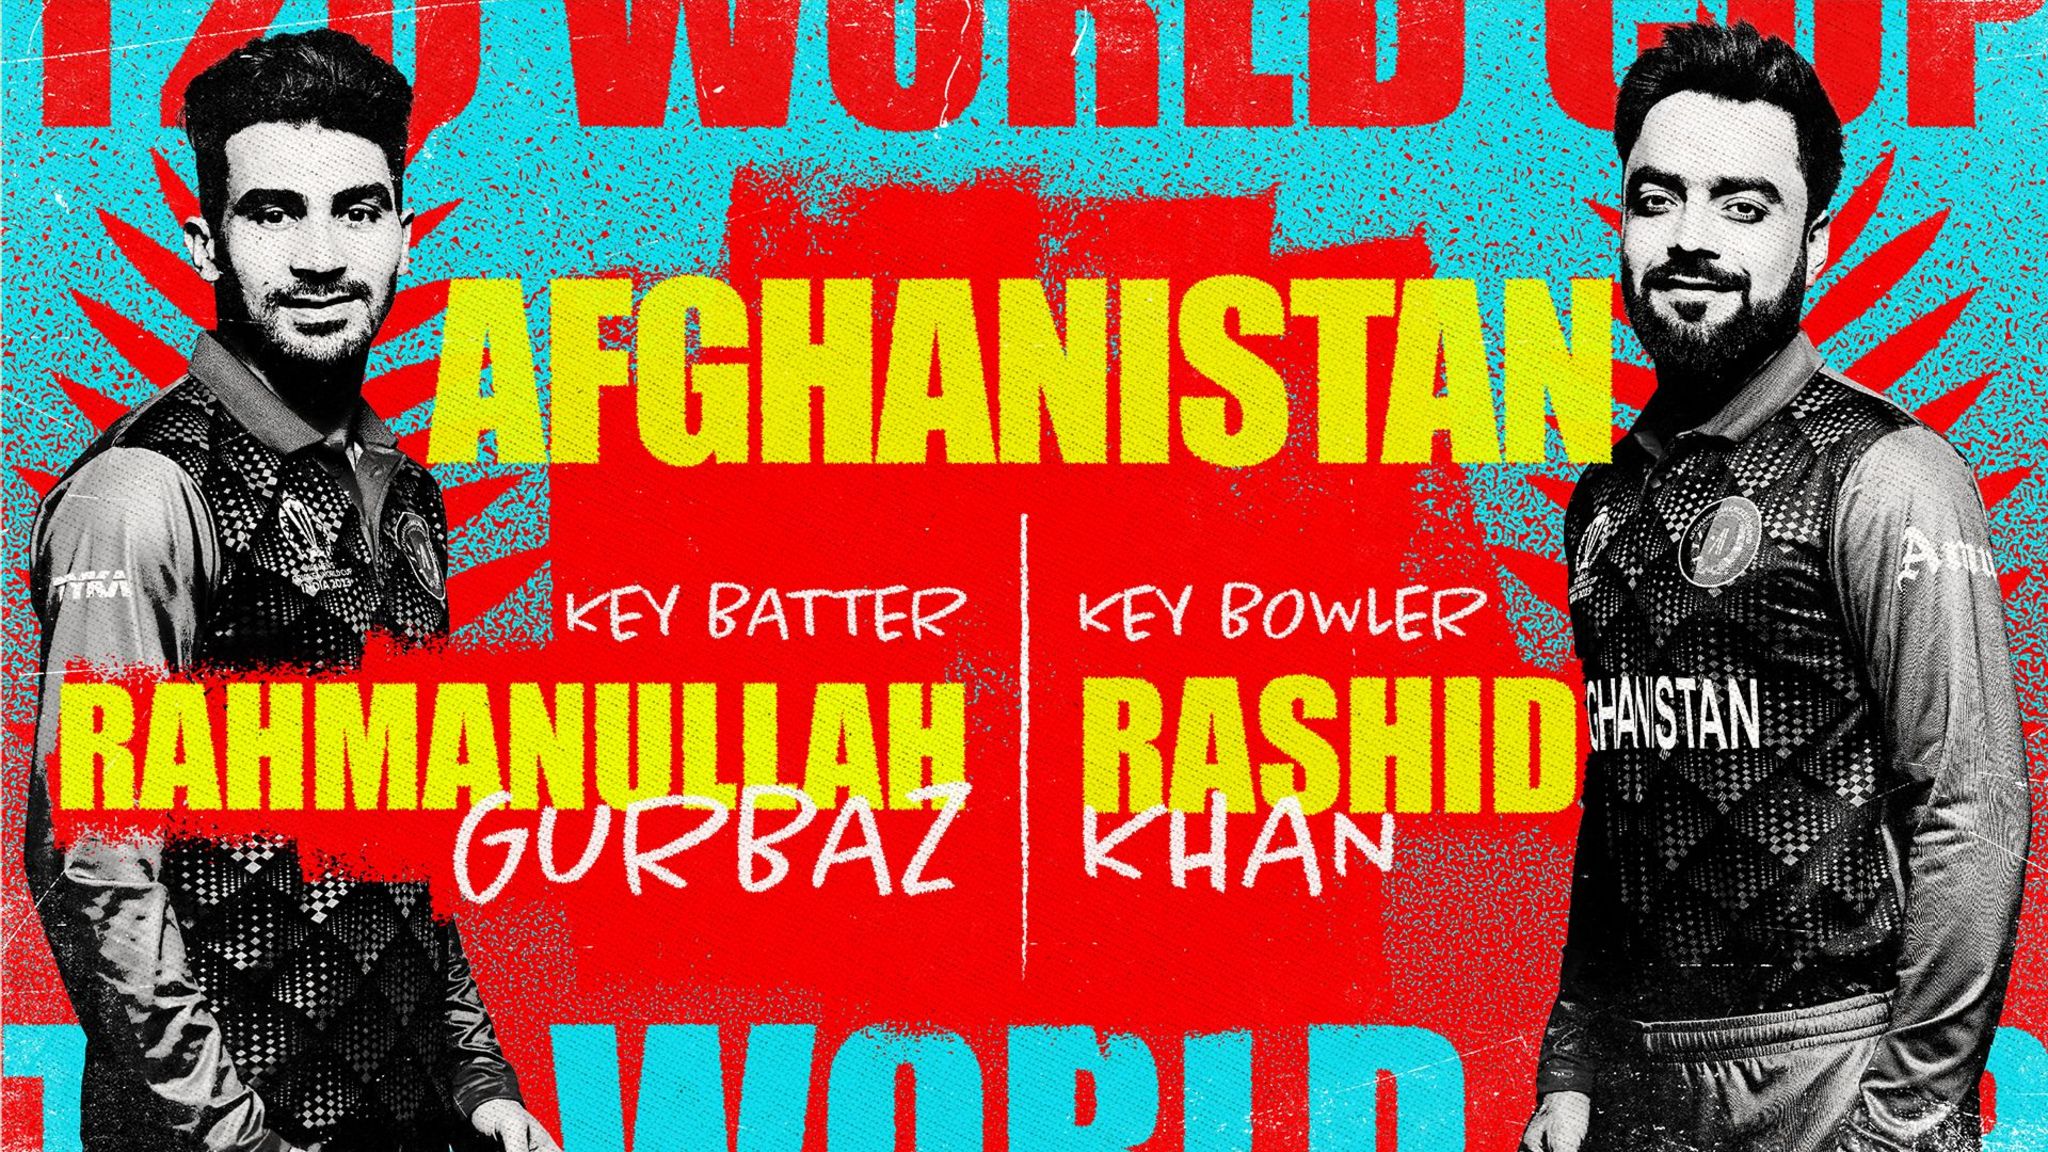 A graphic showing Rahmanullah Gurbaz and Rashid Khan as Afghanistan's key batter and bowler at the Men's T20 World Cup